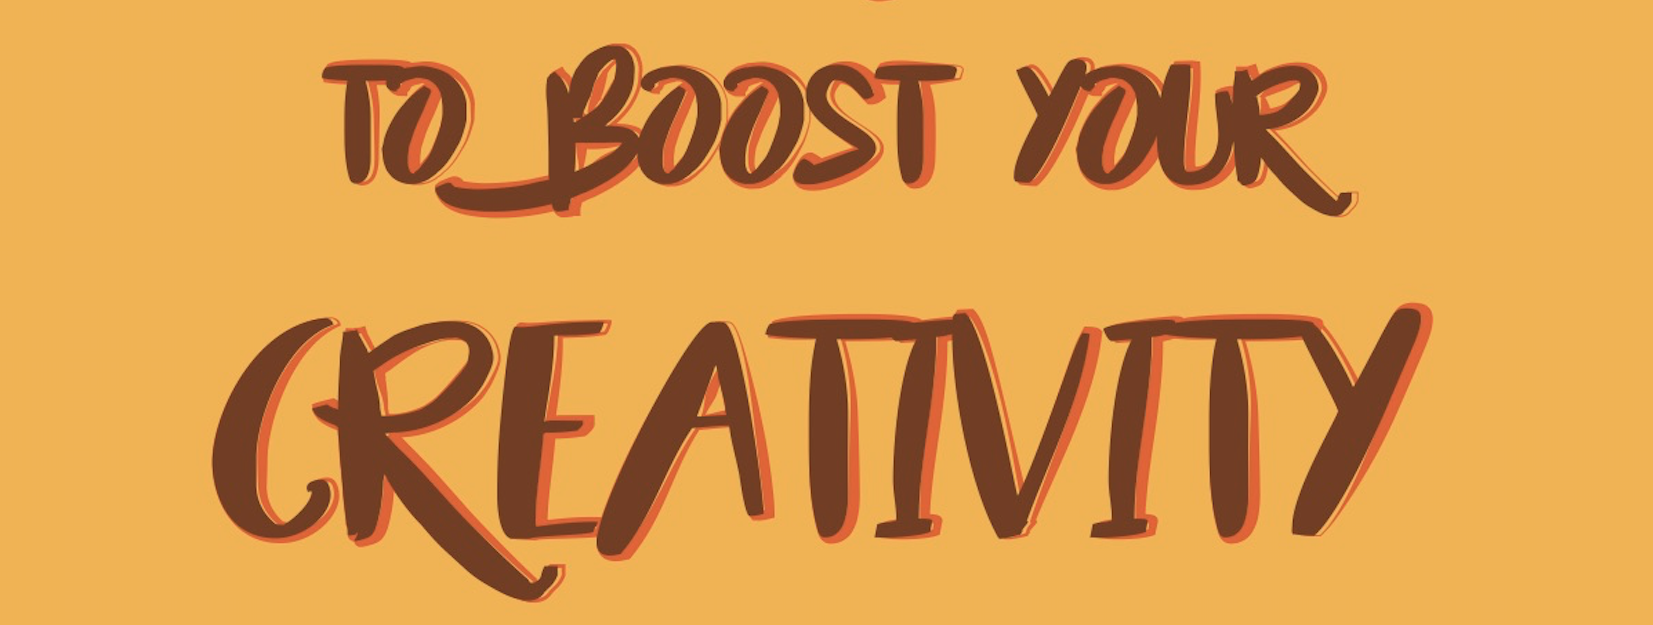 5 Tips How to Boost Your Creativity